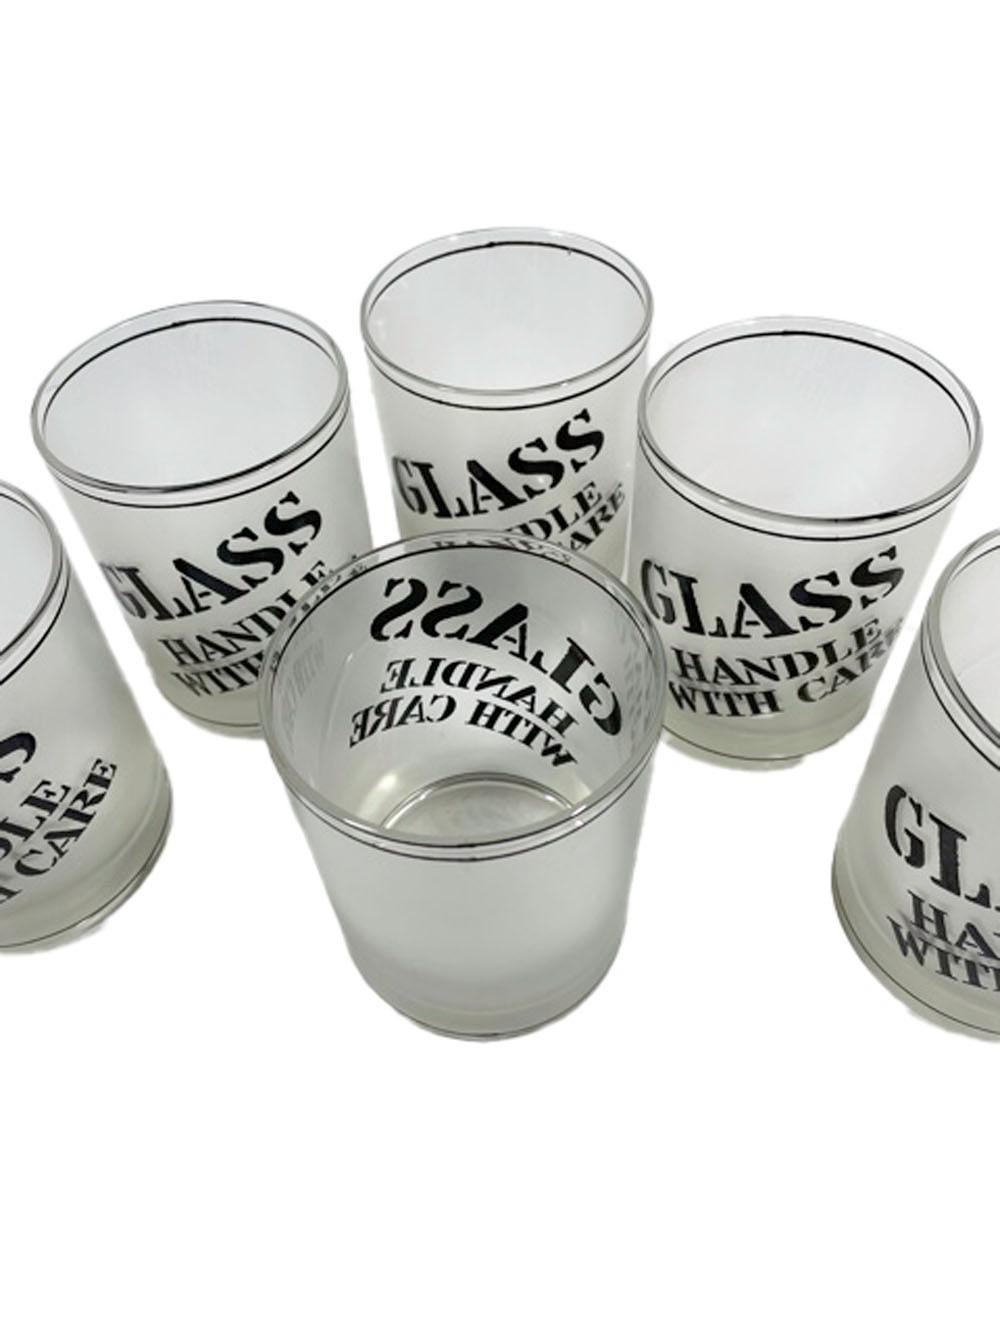 Six Mid-Century Modern rocks glasses by Culver LTD. With the words 